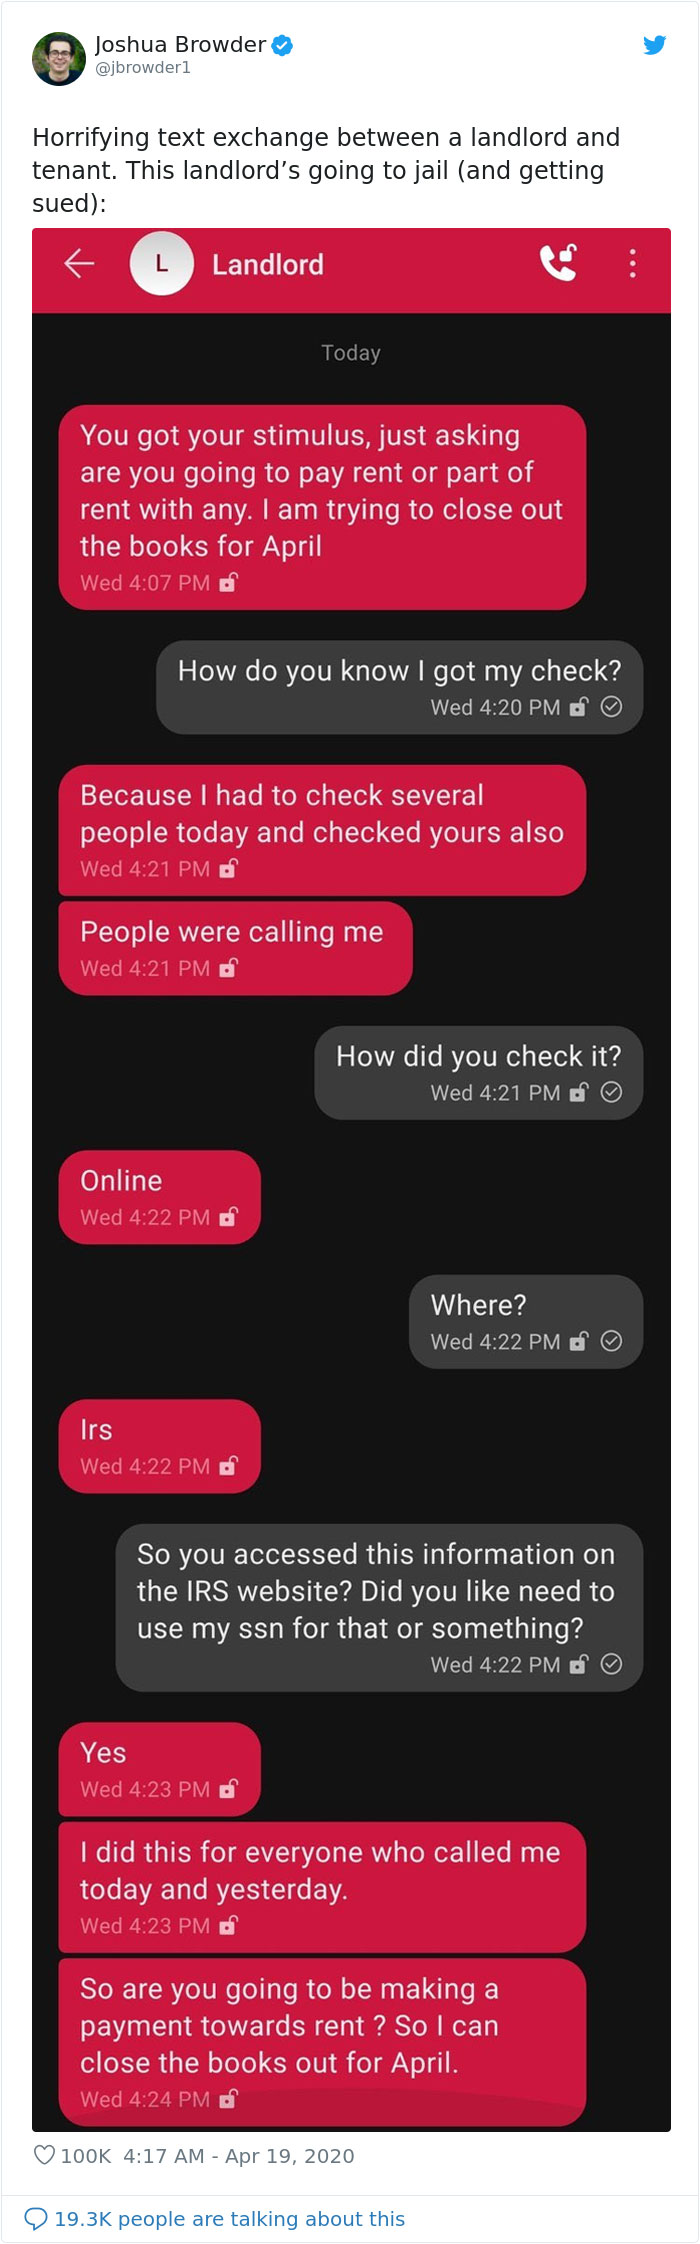 media - Joshua Browder Horrifying text exchange between a landlord and tenant. This landlord's going to jail and getting sued L Landlord Today You got your stimulus, just asking are you going to pay rent or part of rent with any. I am trying to close out 